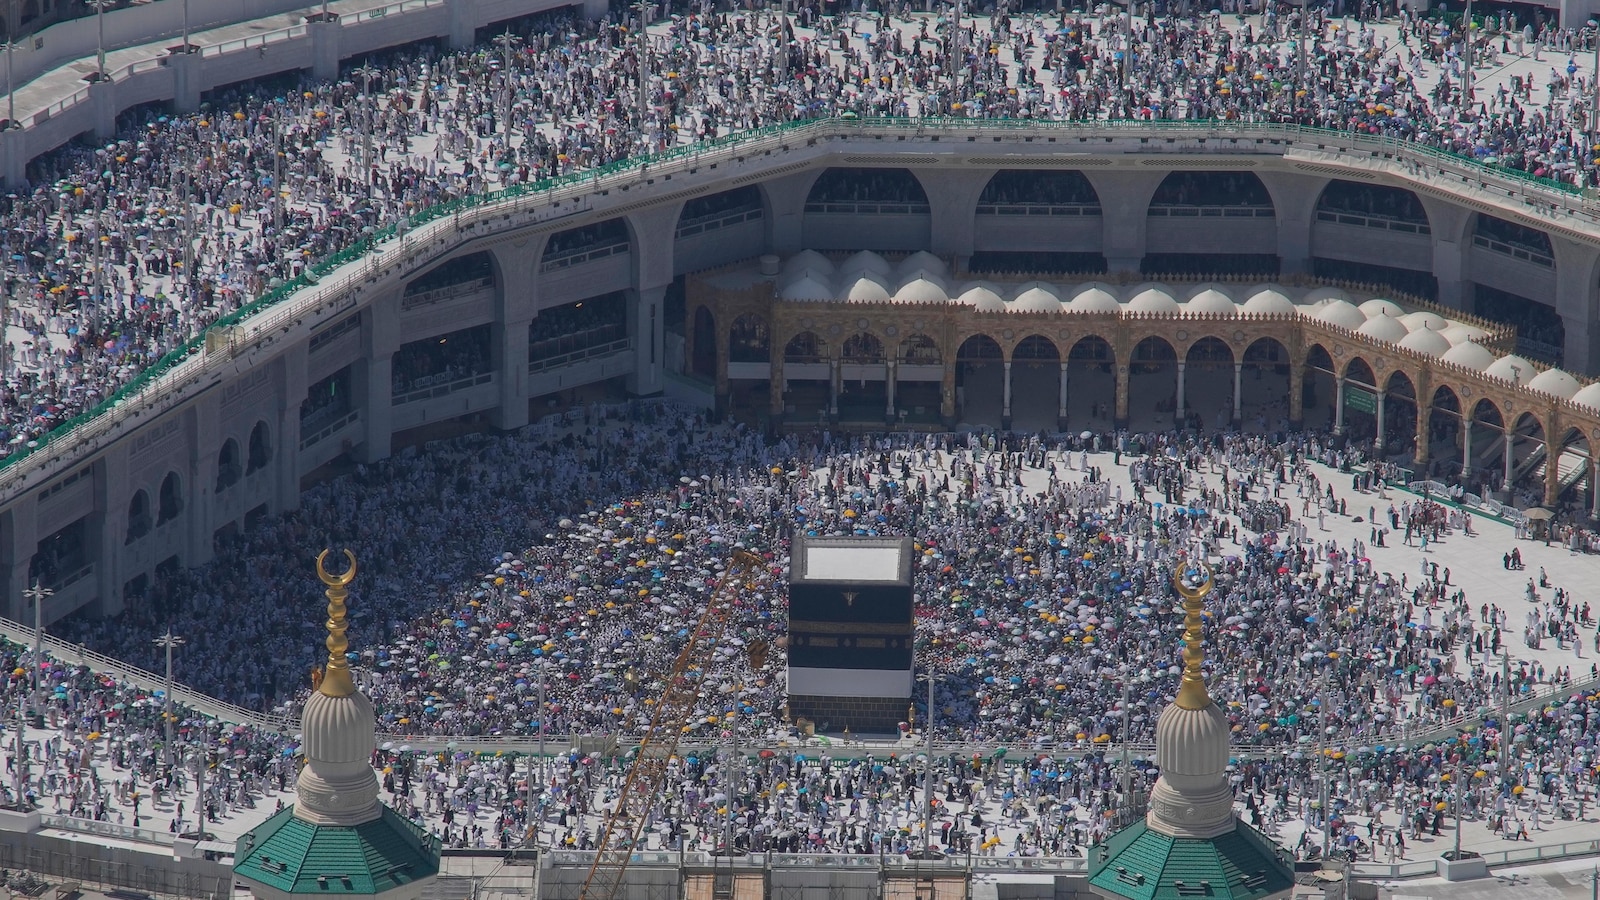 Officials report that more than 1,000 pilgrims lost their lives during this year's Hajj pilgrimage in Saudi Arabia